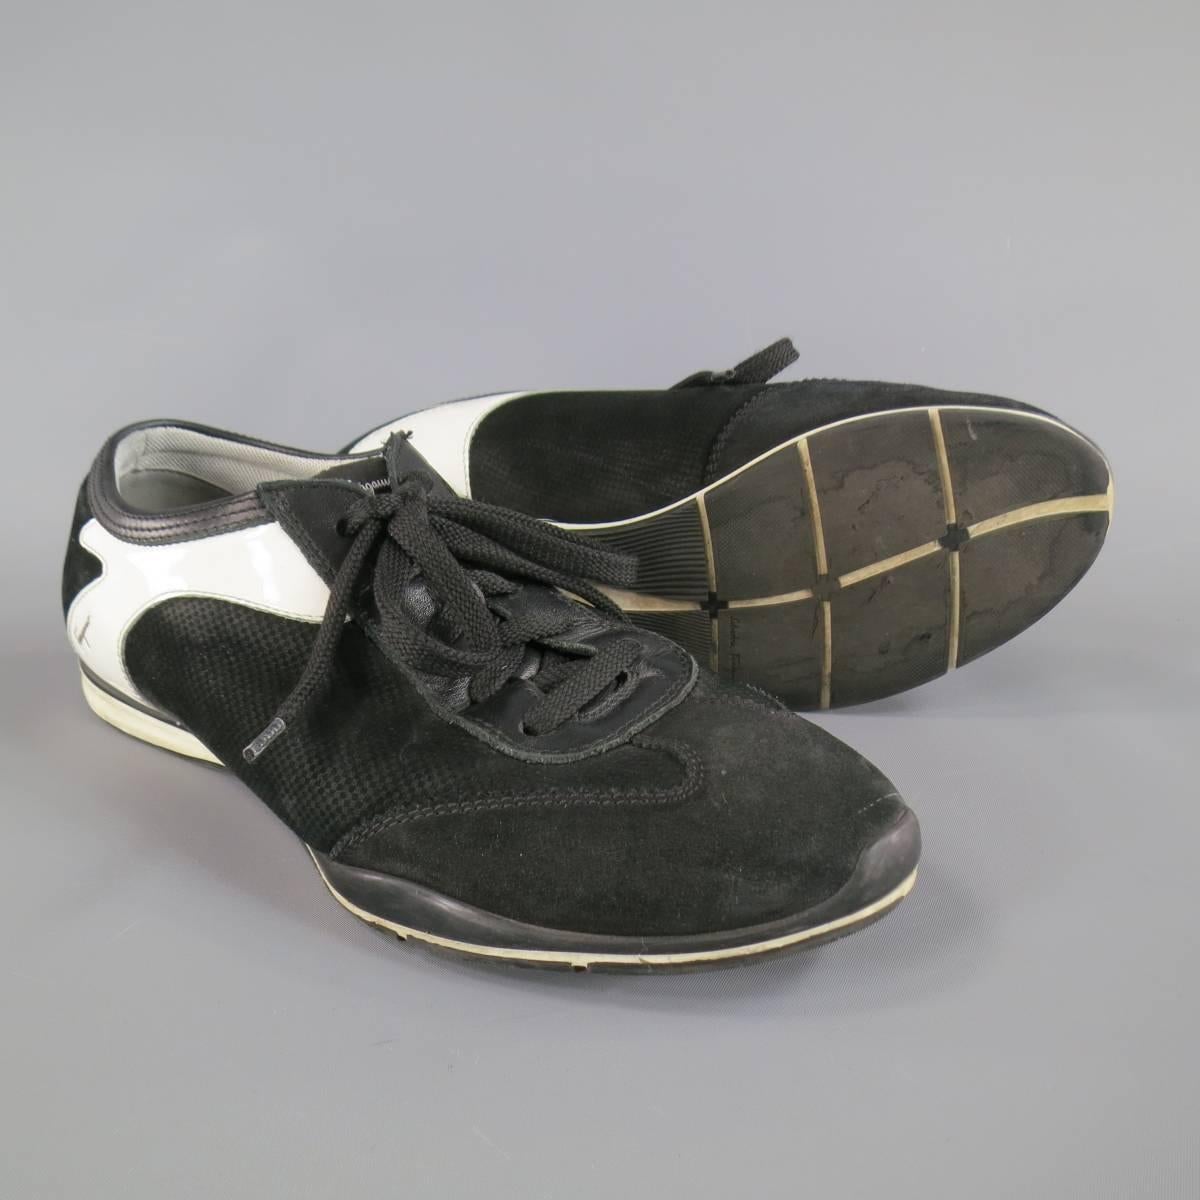 Salvatore Ferragamo Sneakers consists of suede material in a black and white color tone. Designed in a round toe front, contrast white trimming along back. Detailed with rubber sole. Made in Italy.
 
Good Pre-Owned Condition
Marked Size: EE 7
